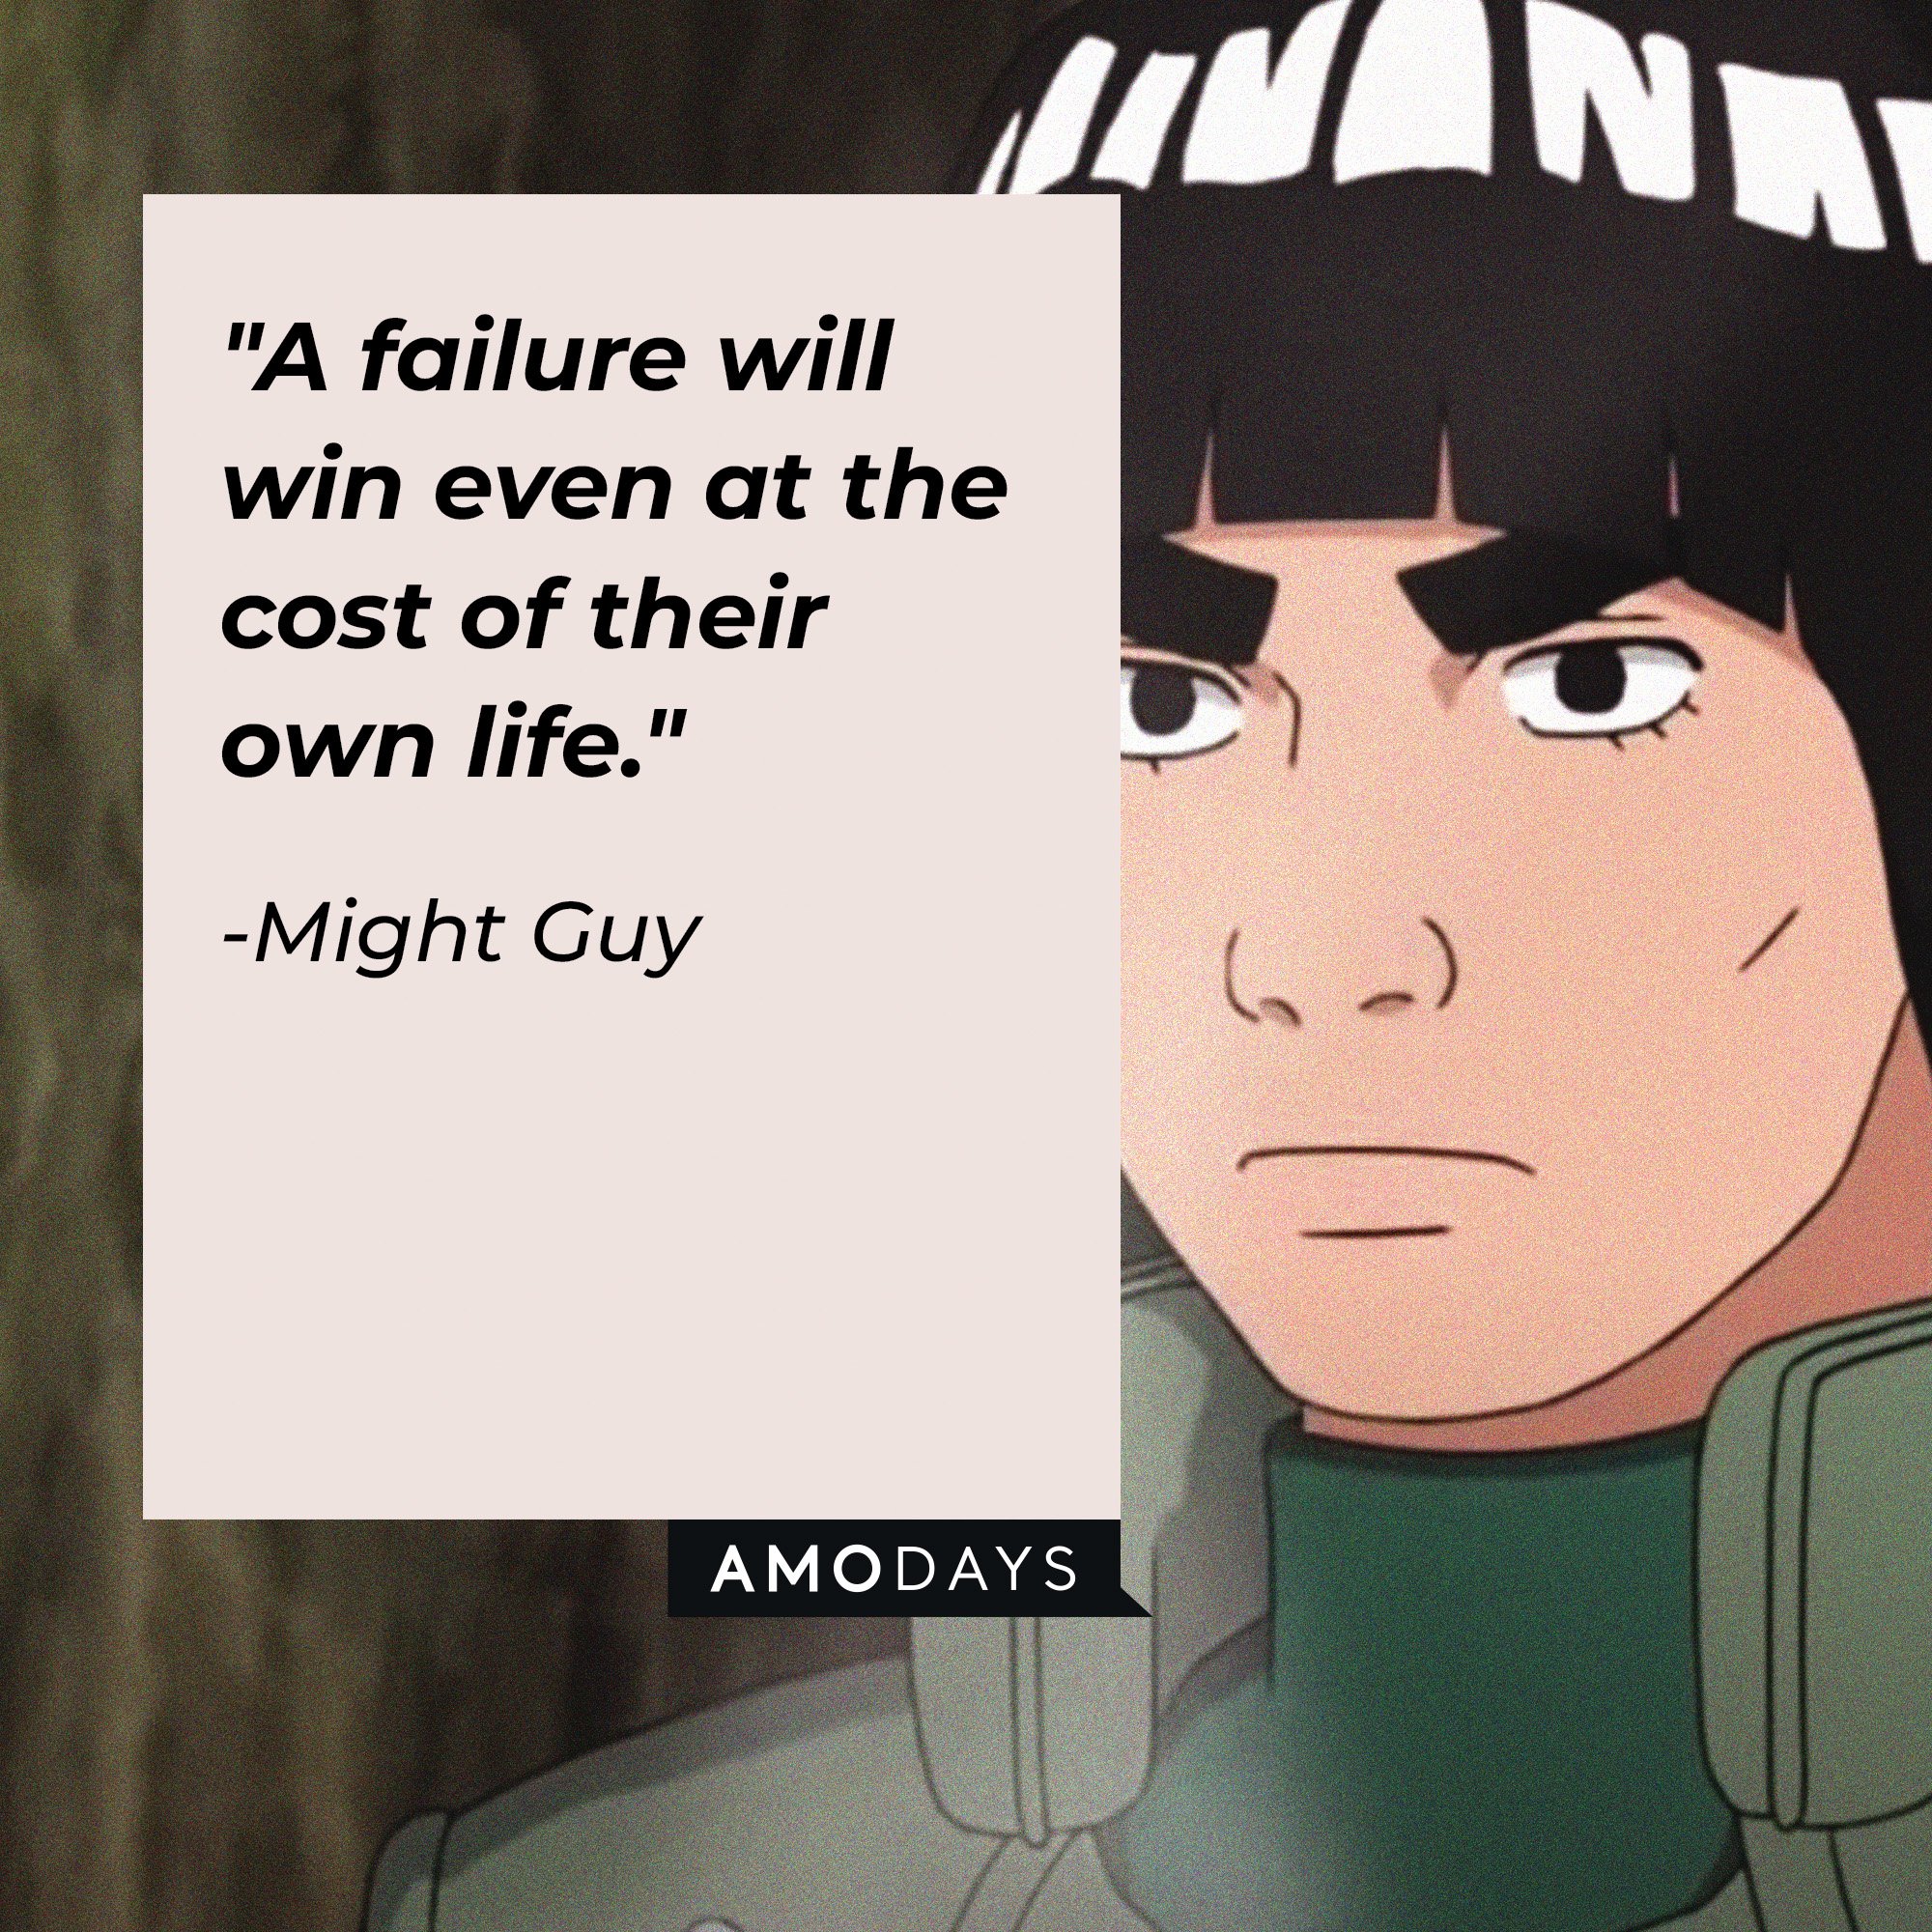 Might Guy's quote: "A failure will win even at the cost of their own life." | Image: AmoDays